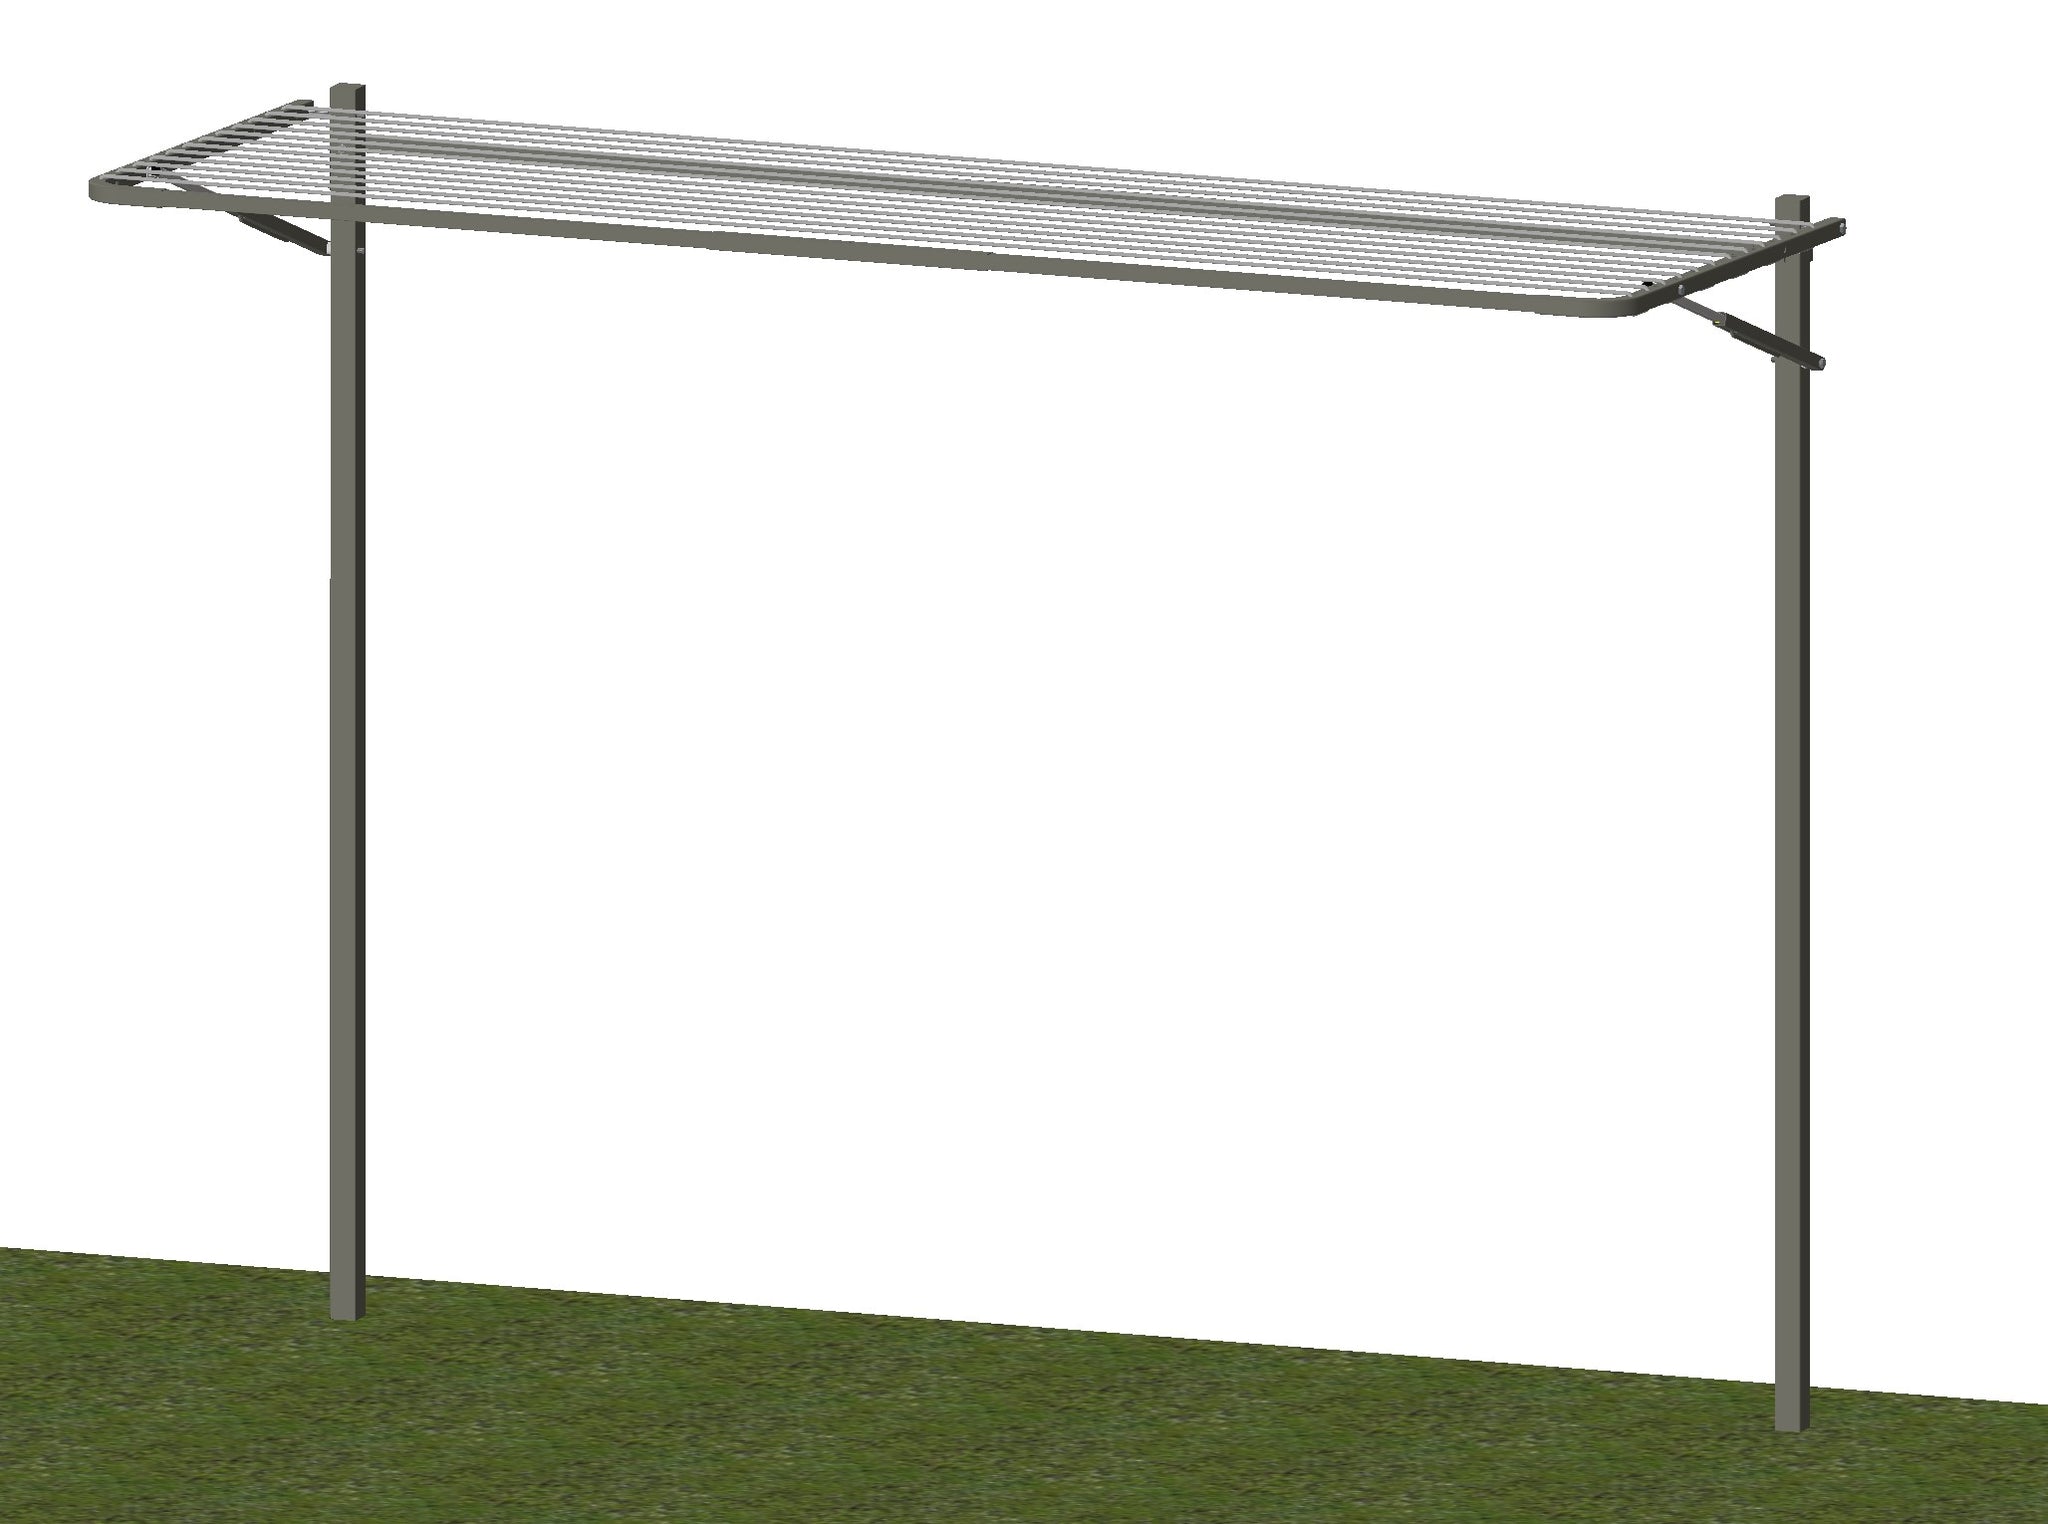 City Living Mainline 2400 x 600 Ground Mount Woodland Grey-Aussie Clotheslines & Letterboxes